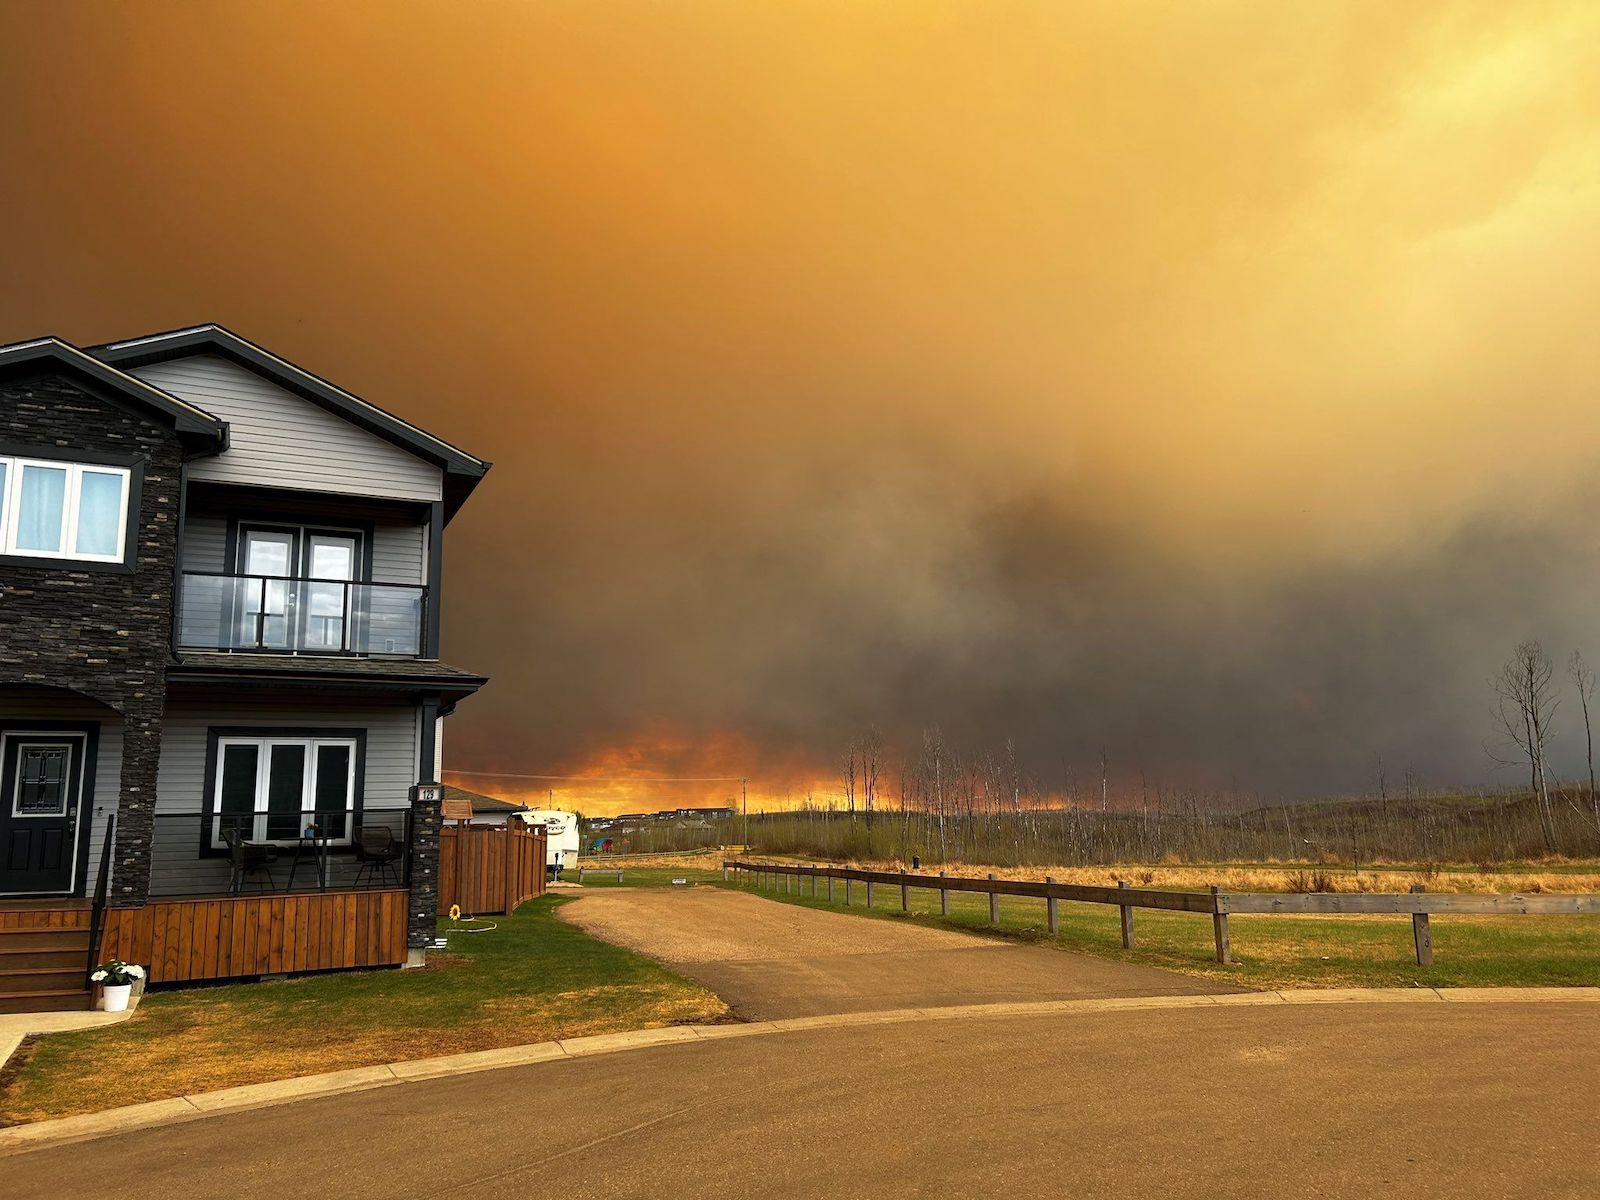 A home sits next to a field showing the scorched remnants of trees, under a smoke-filled sky tinged orange from the glow of fires visible in the background.